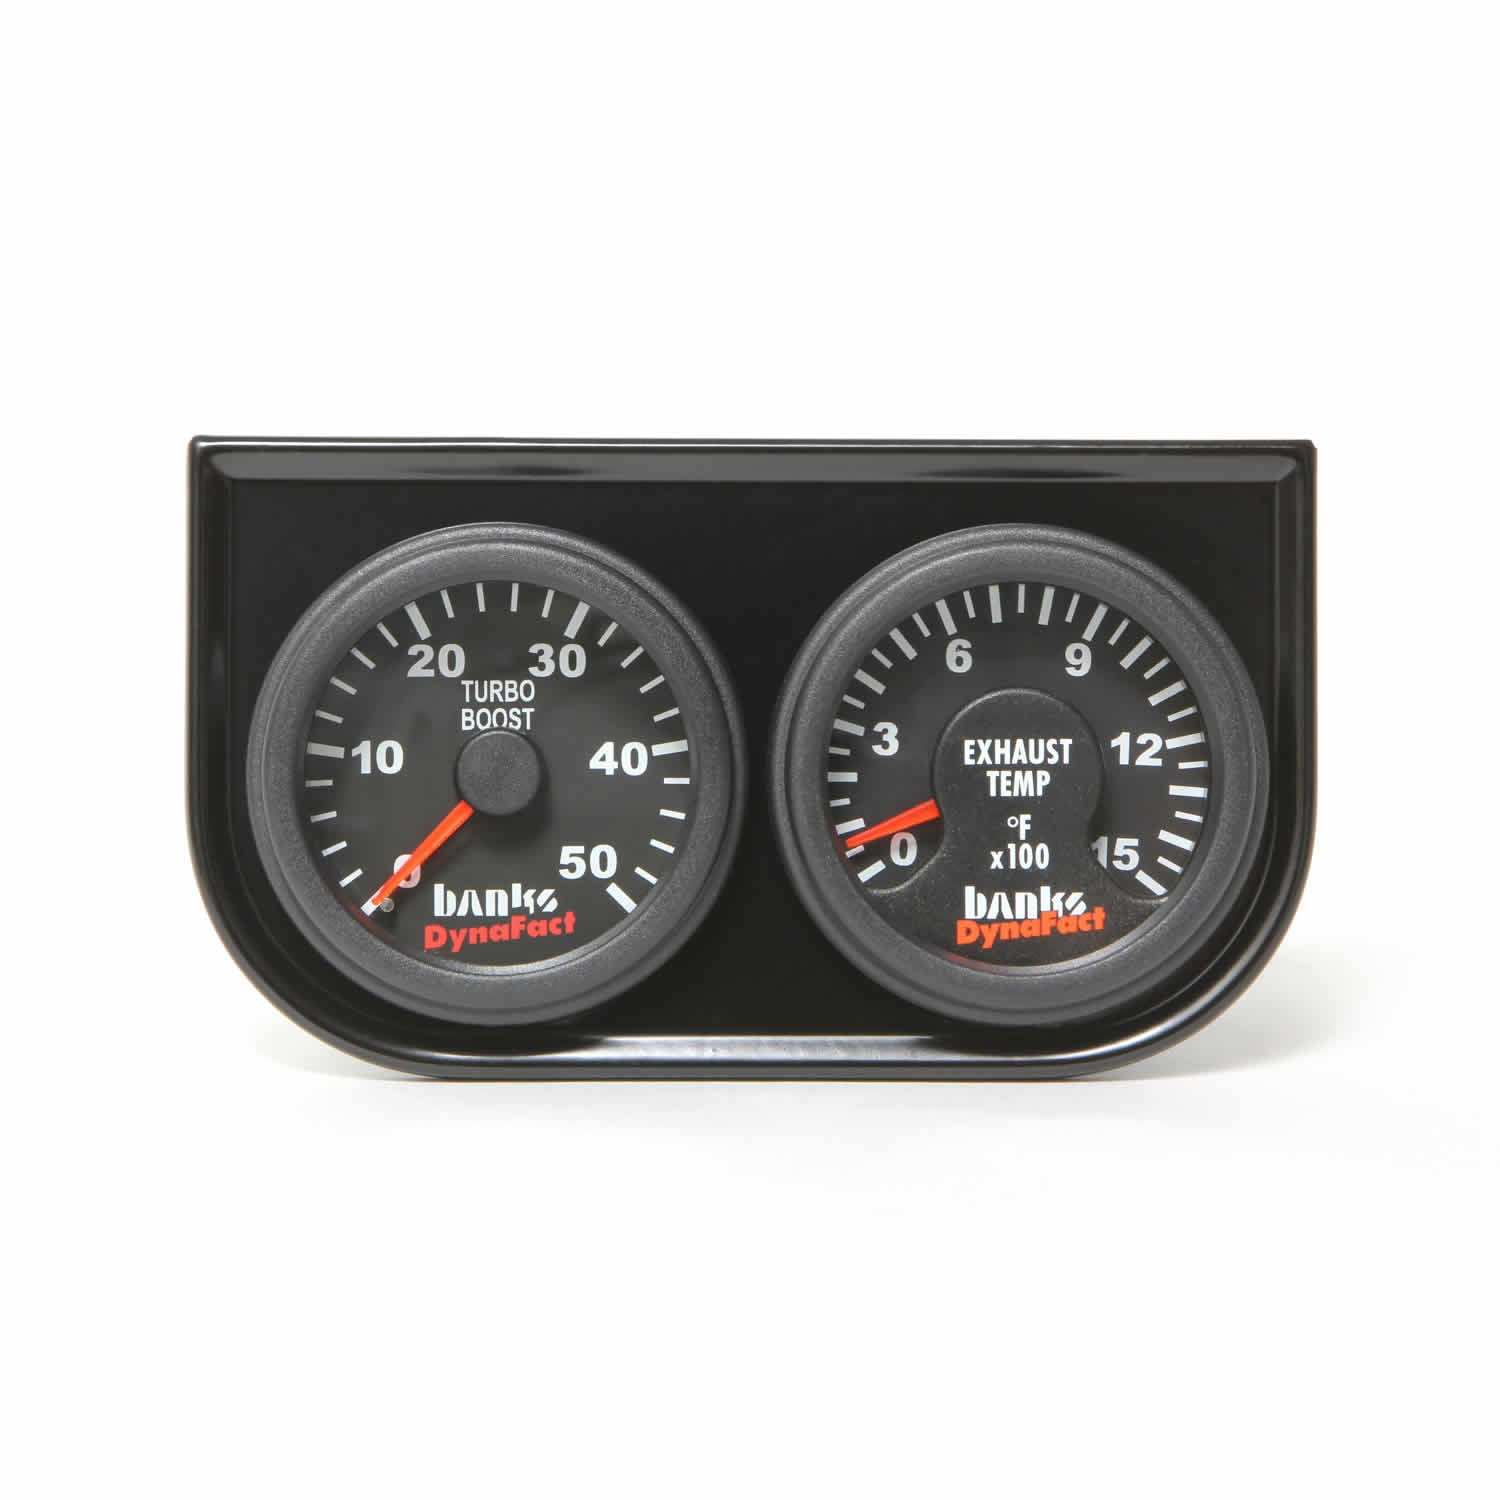 Banks Pyrometed and Boost gauge